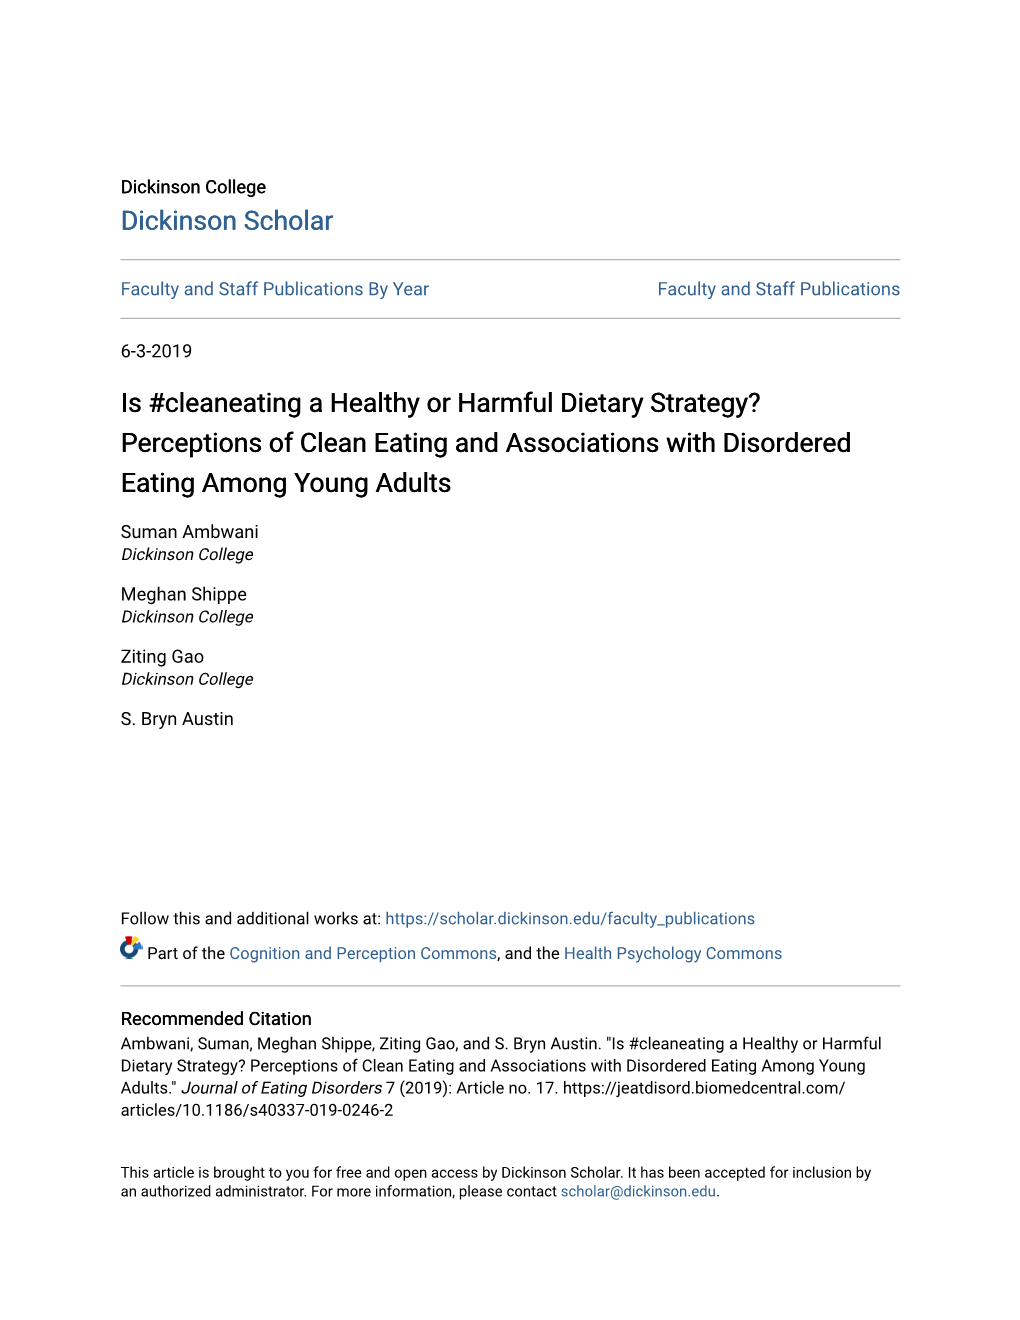 Is #Cleaneating a Healthy Or Harmful Dietary Strategy? Perceptions of Clean Eating and Associations with Disordered Eating Among Young Adults